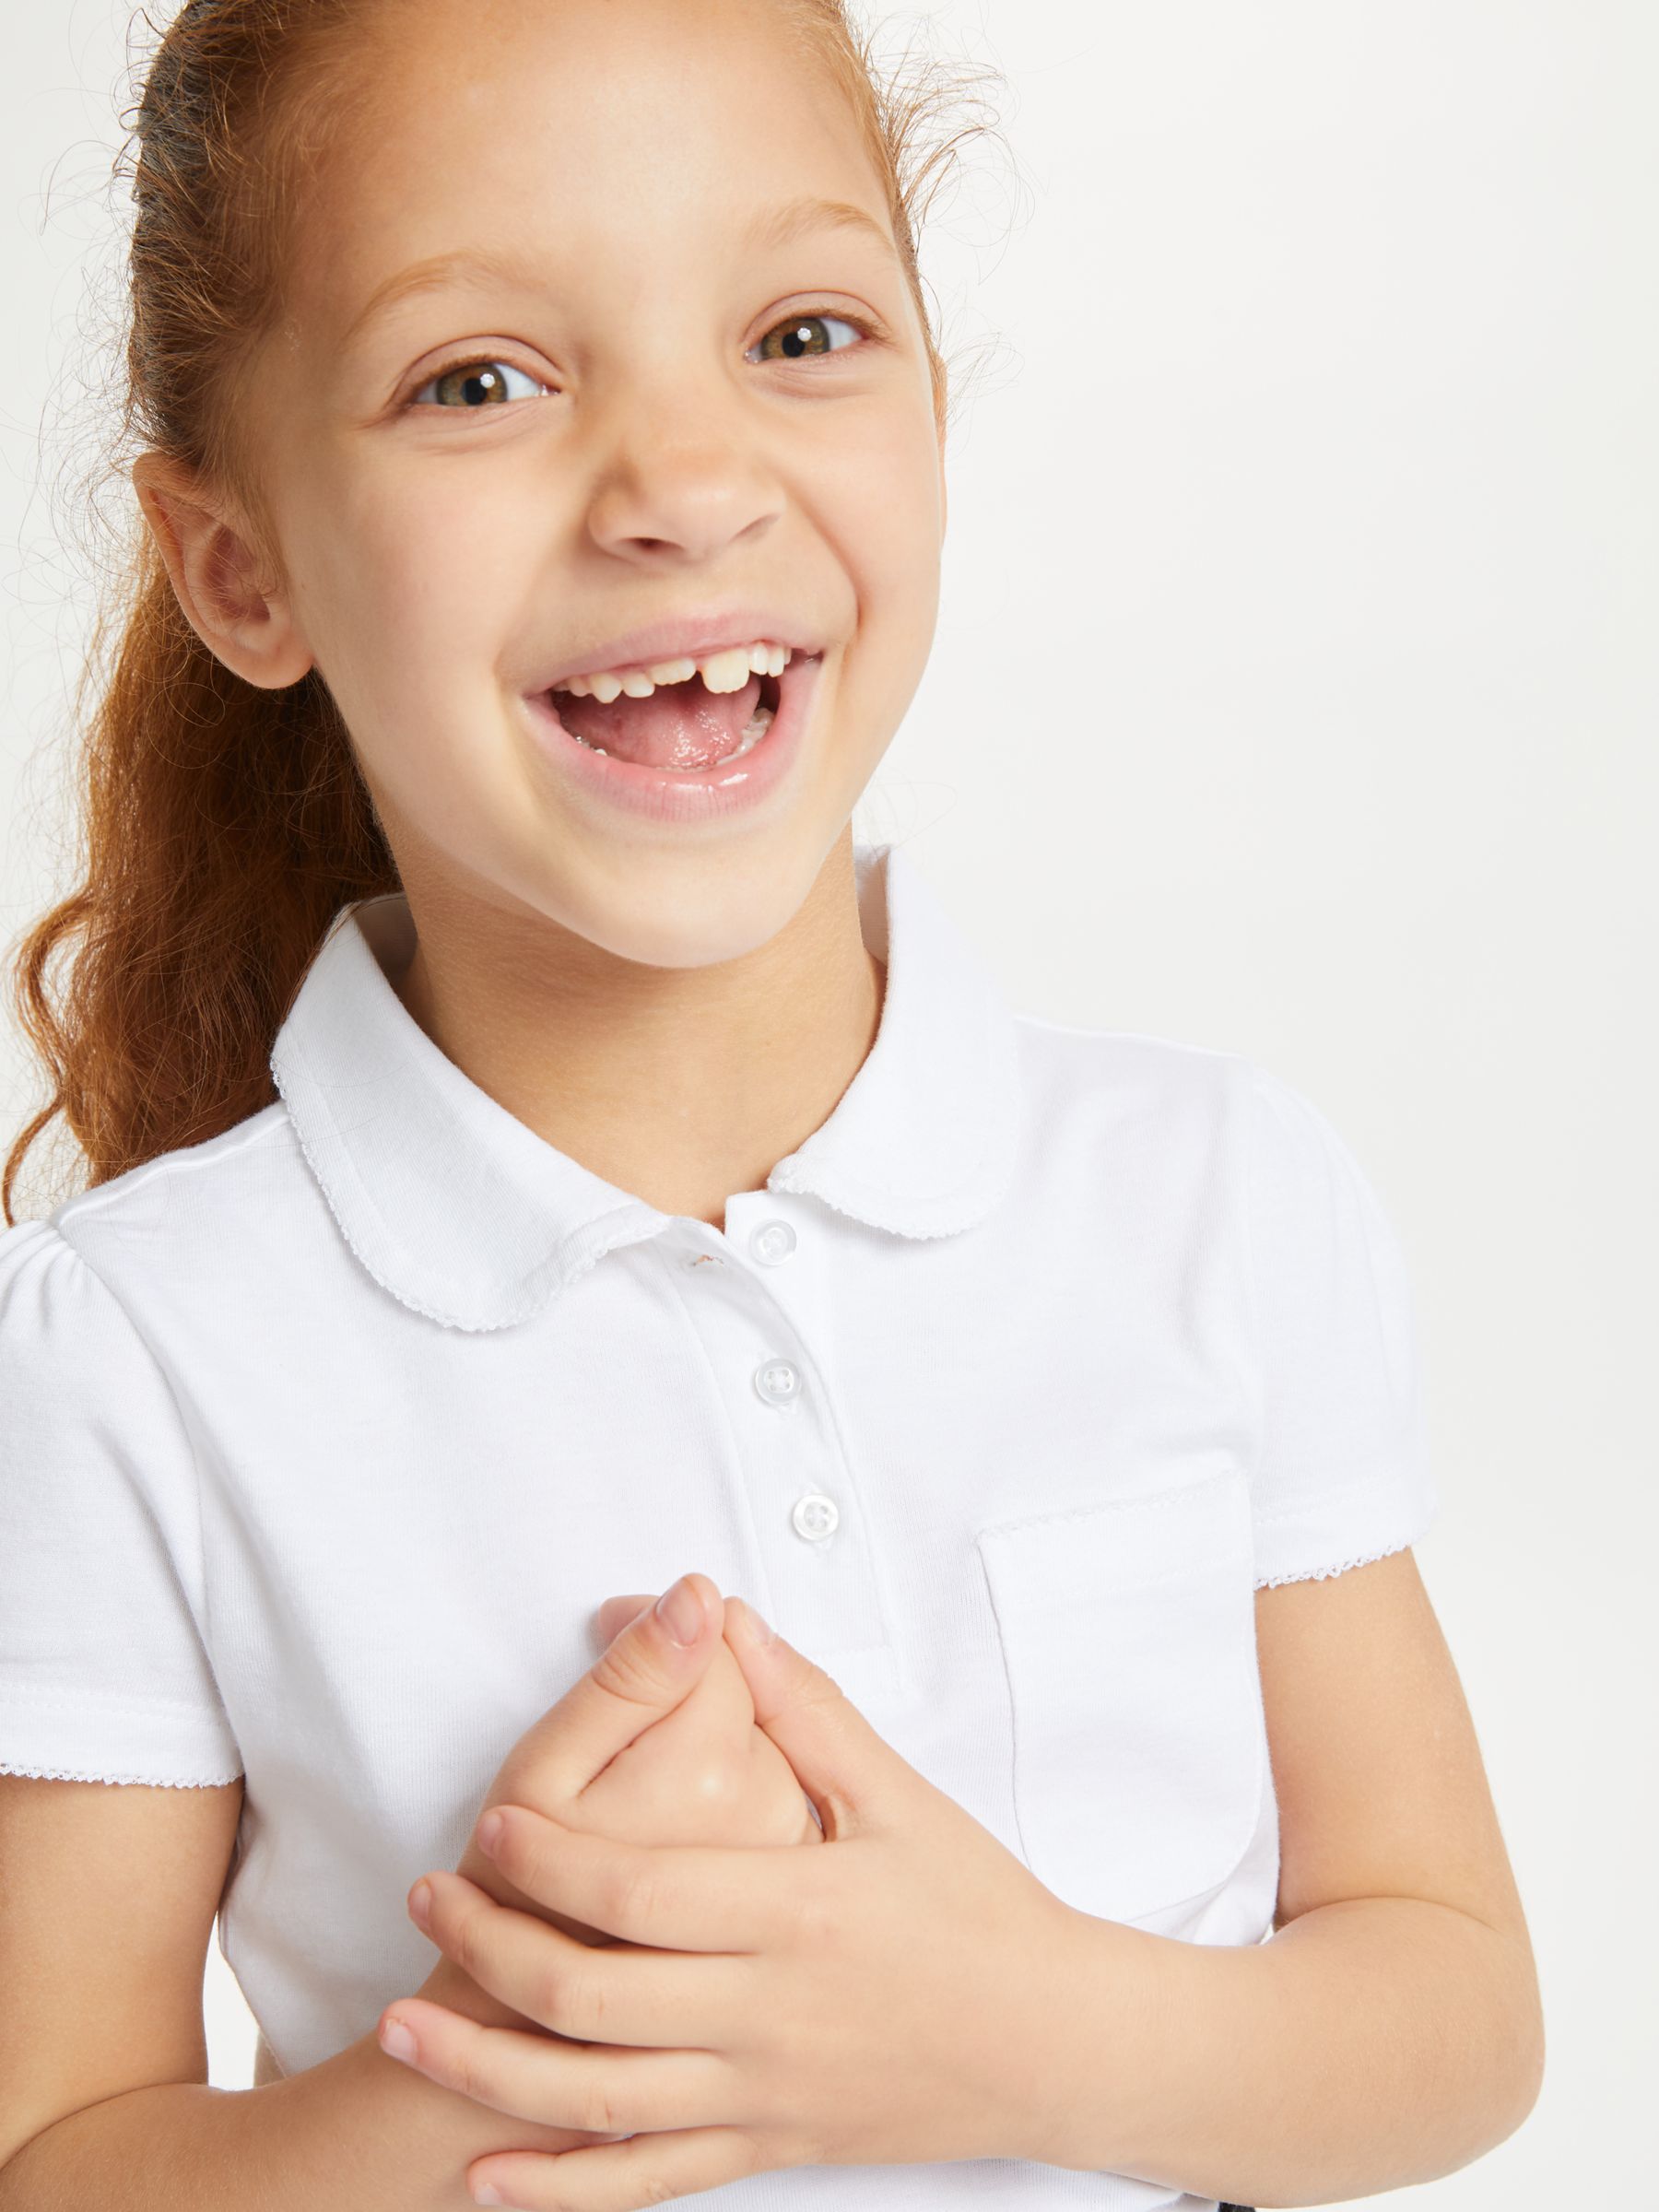 Buy John Lewis Pure Cotton Picot Trim School Polo Shirt, Pack of 2 Online at johnlewis.com